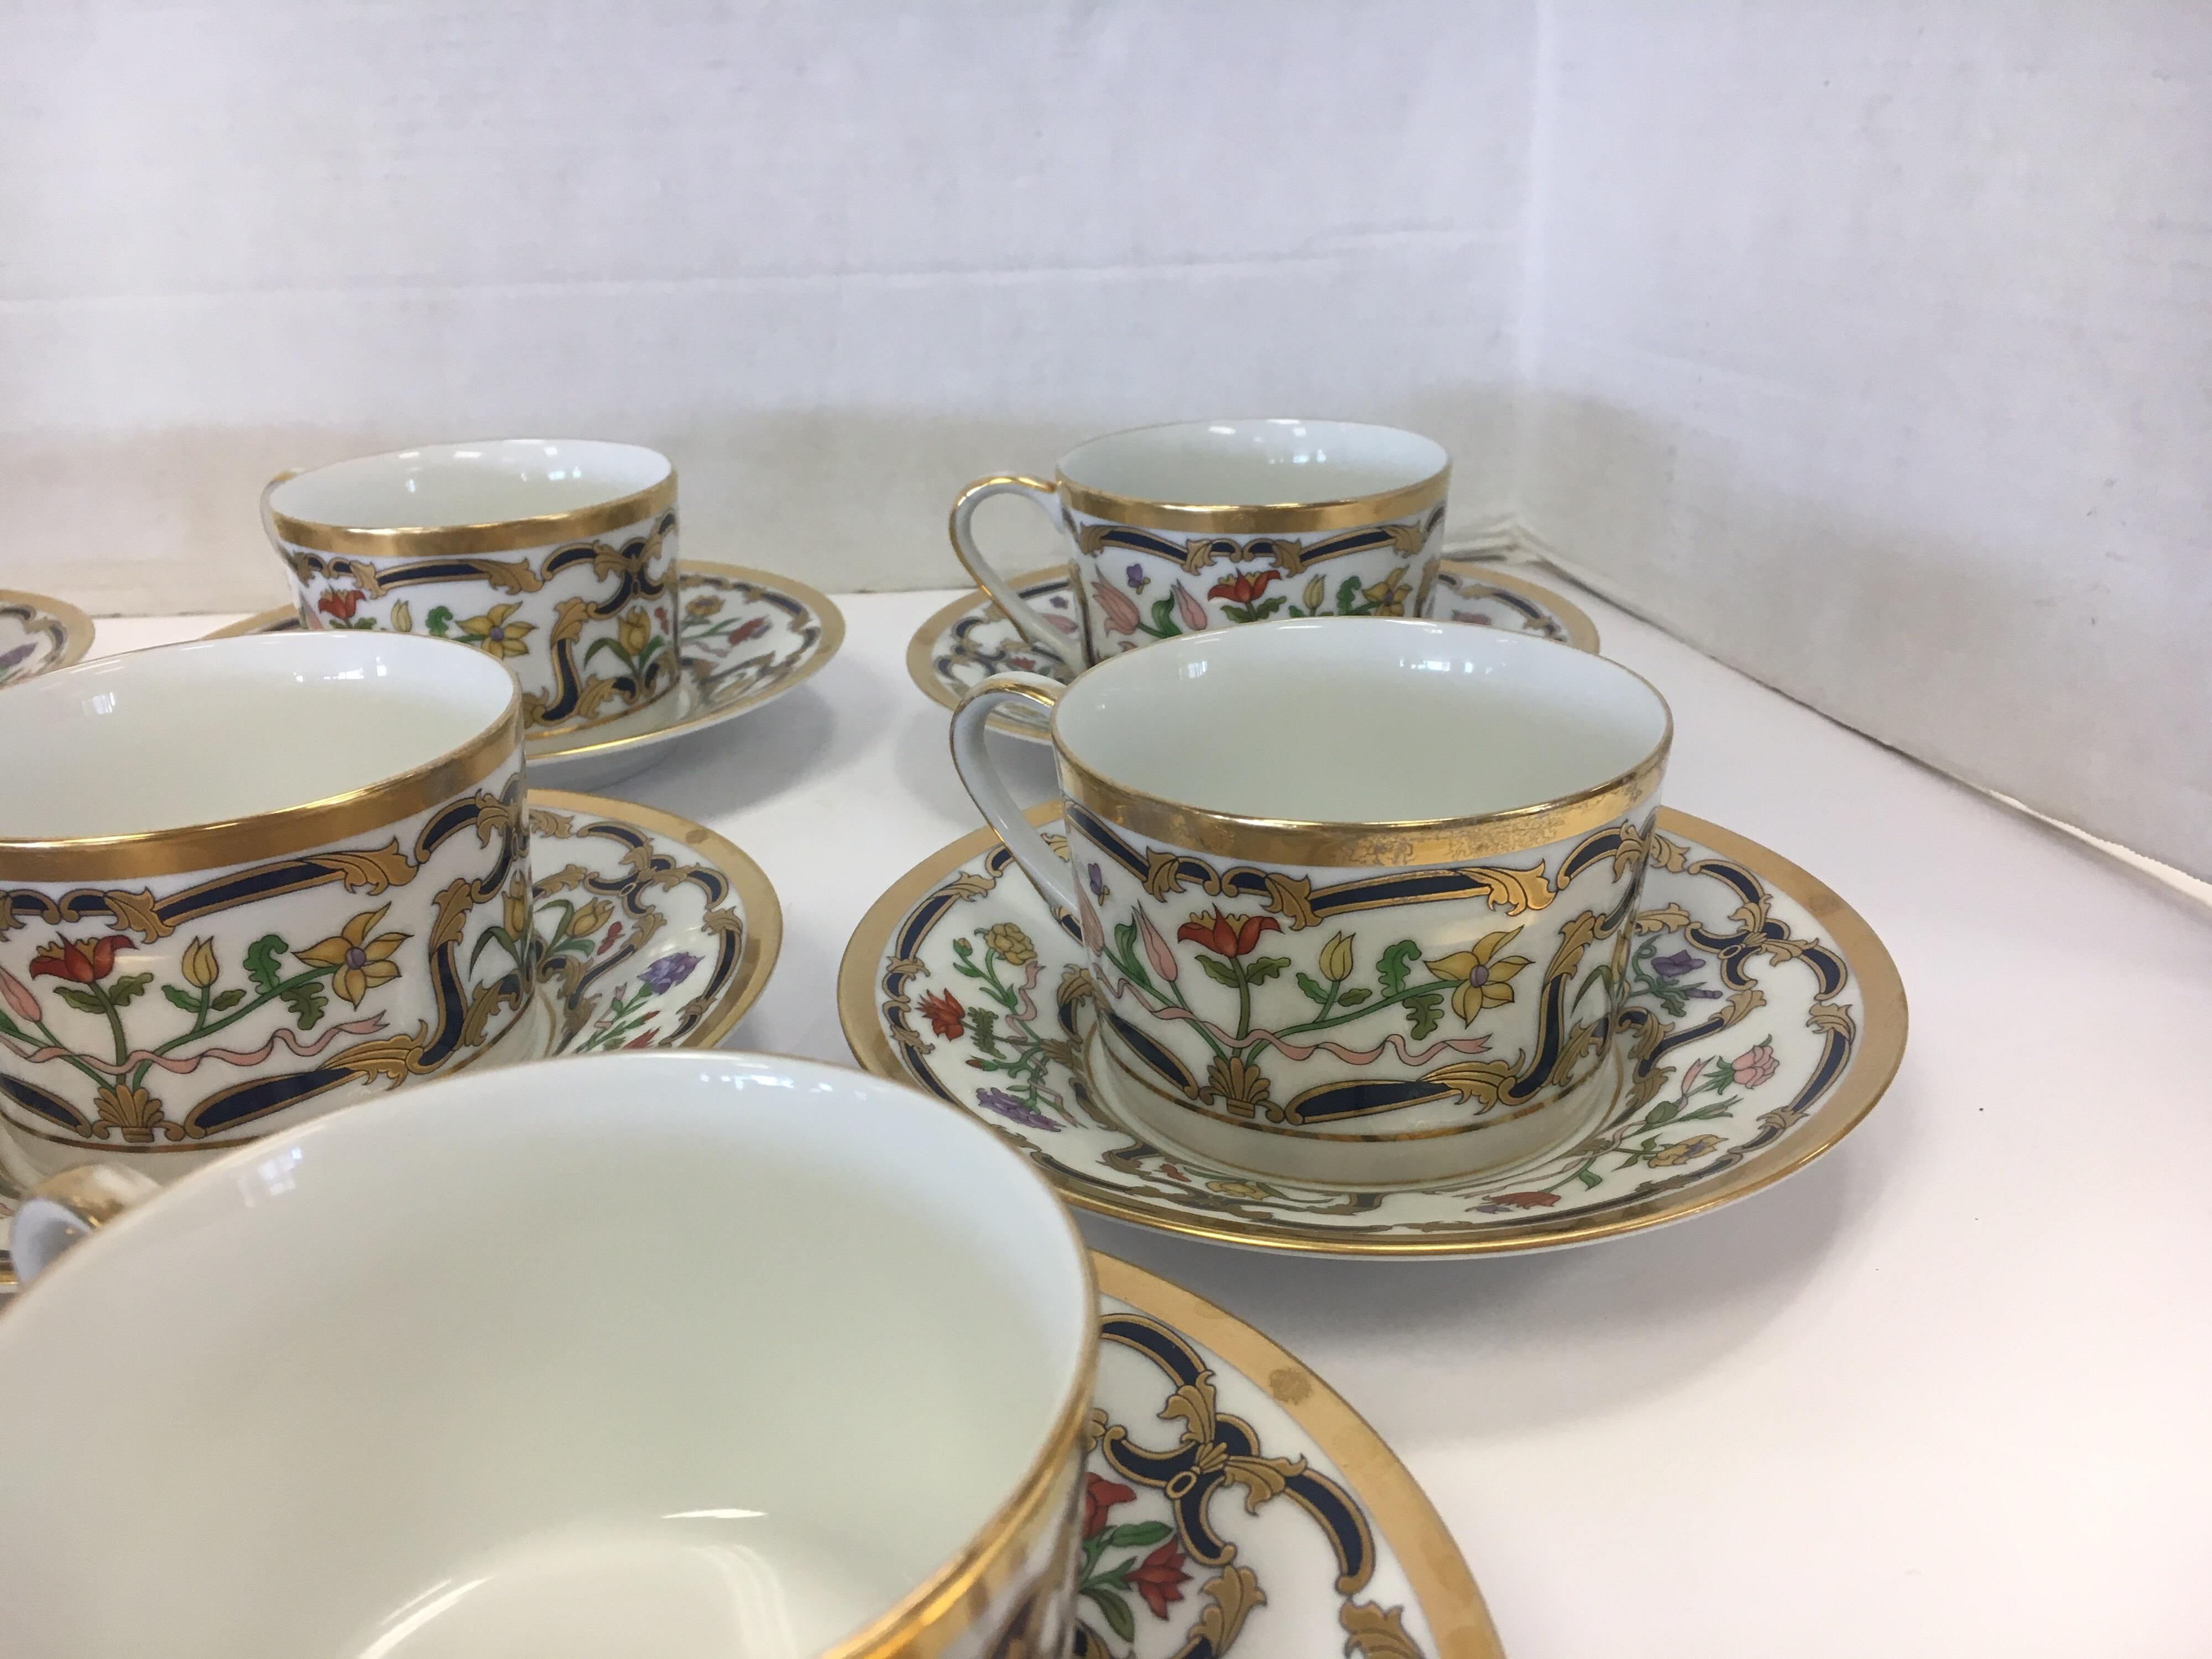 North American Christian Dior Renaissance Porcelain Set of Eight Teacups and Saucers